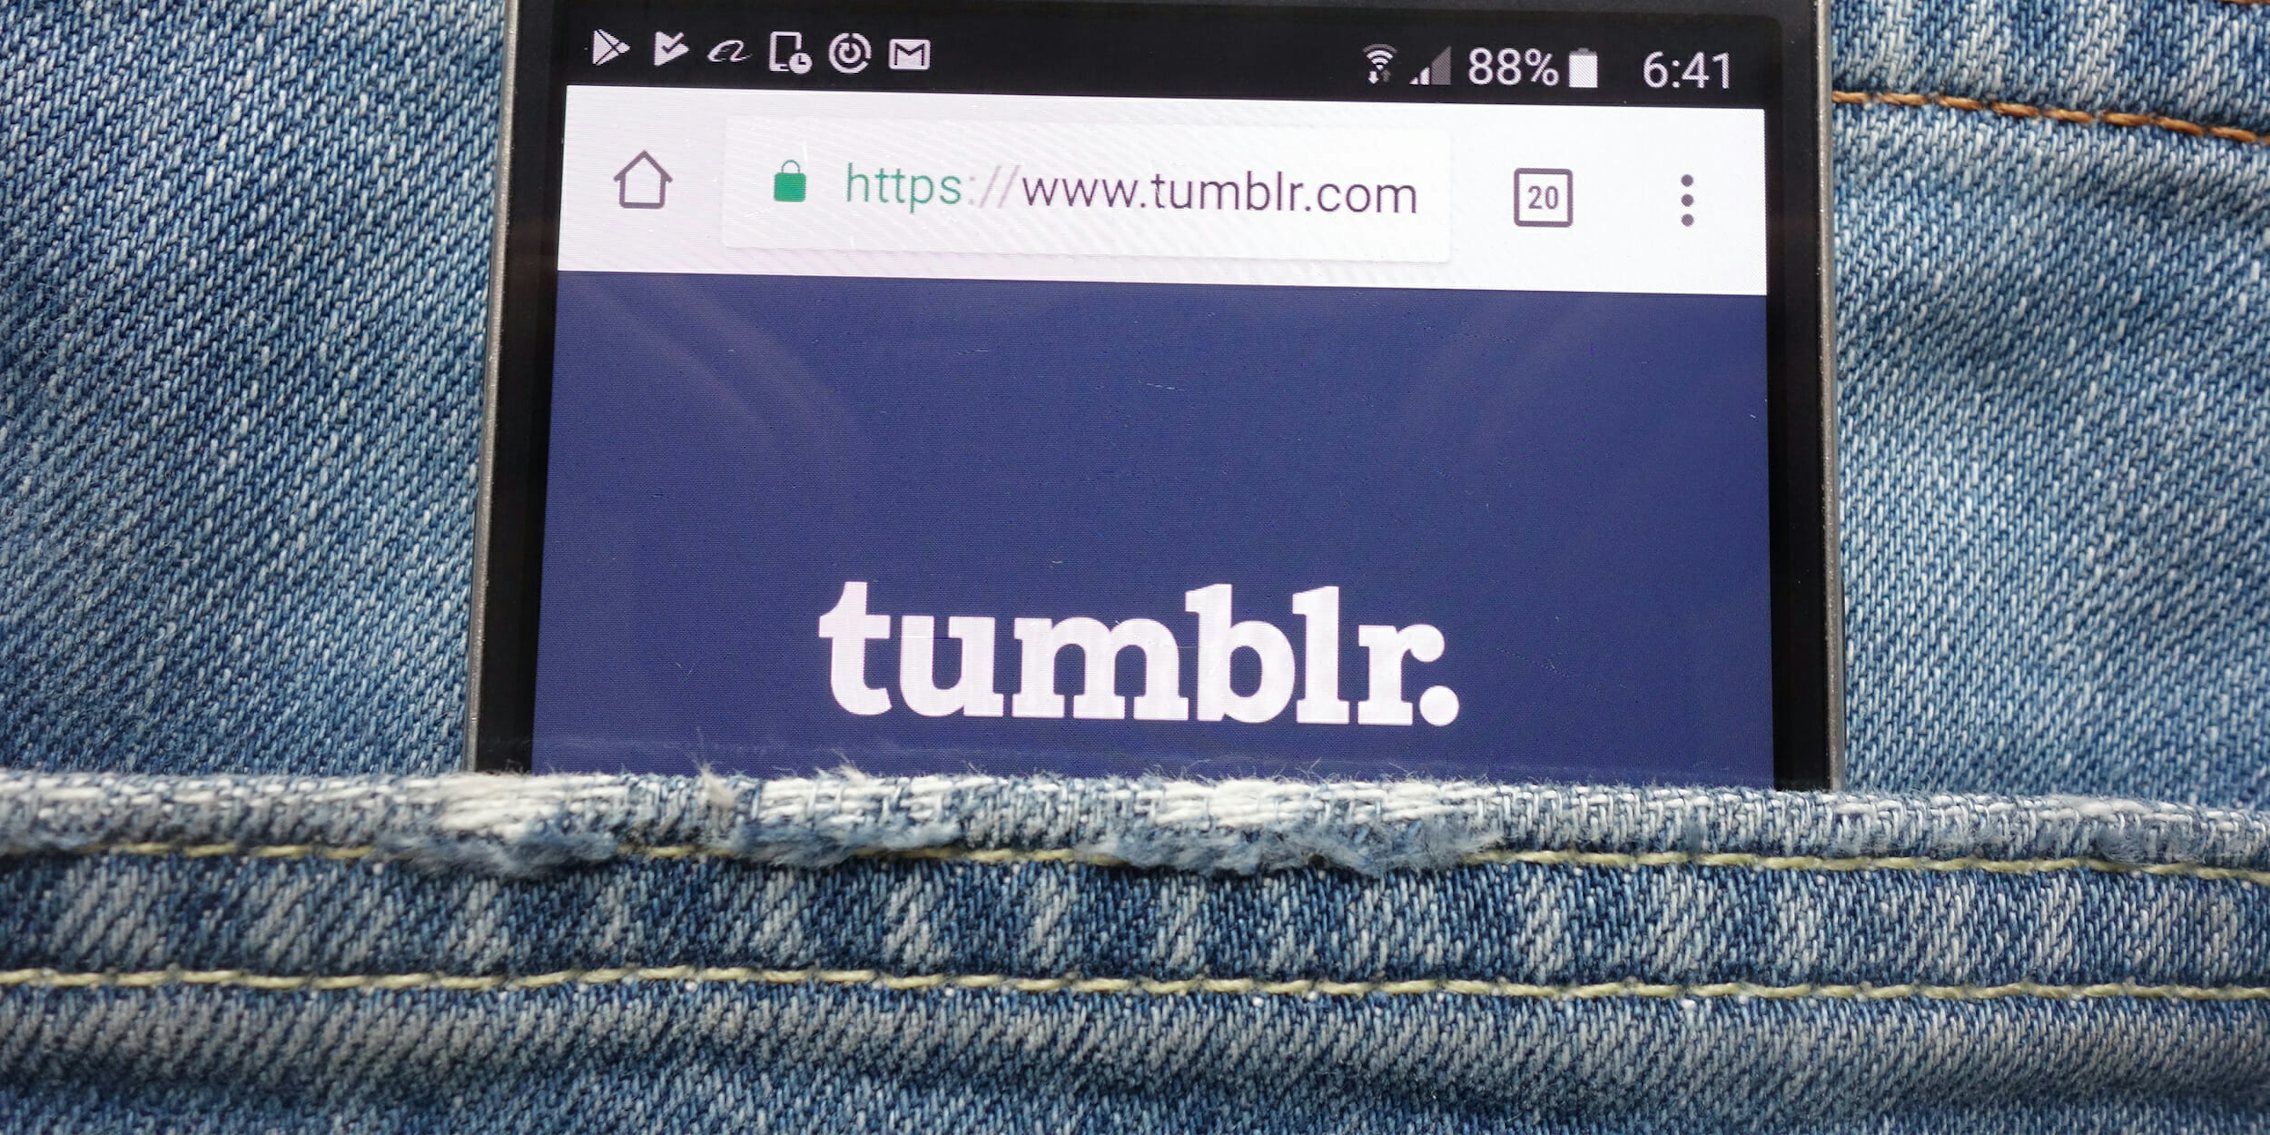 Best Tumblr Porn Close Up - The Best Porn Tumblrs of 2018: The Hottest NSFW Blogs